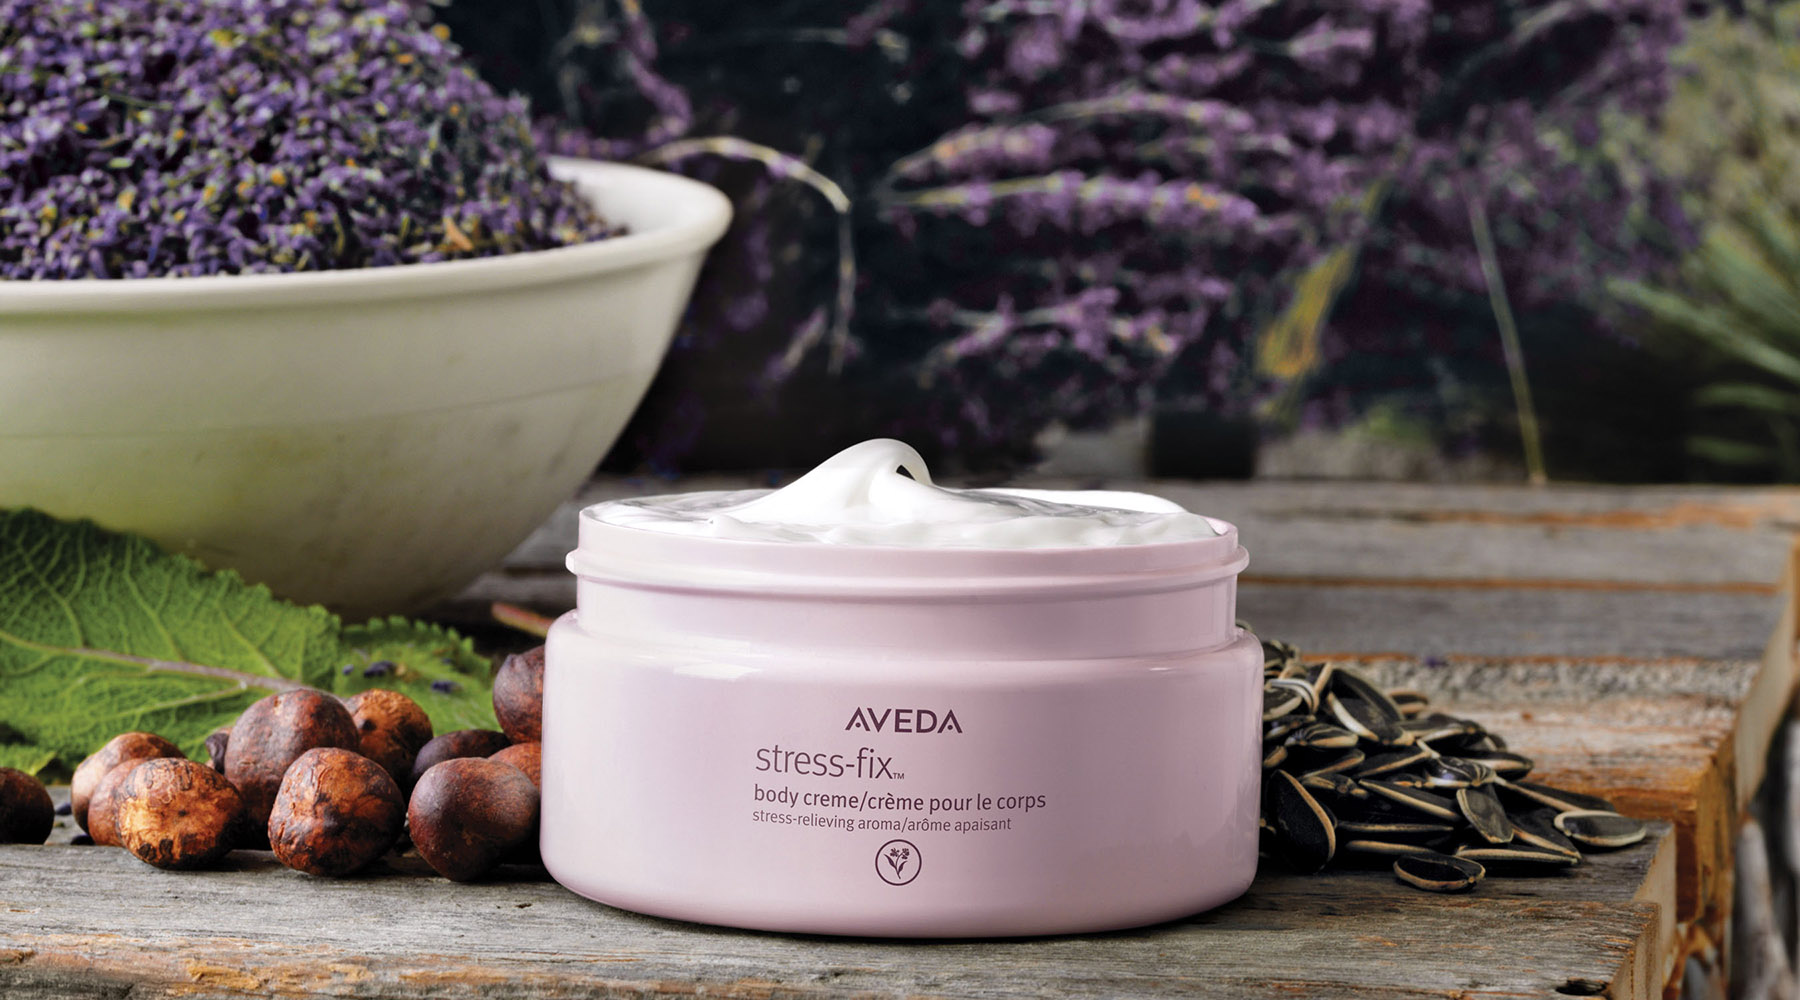   FEATURED PRODUCTS    Shop Aveda Now  